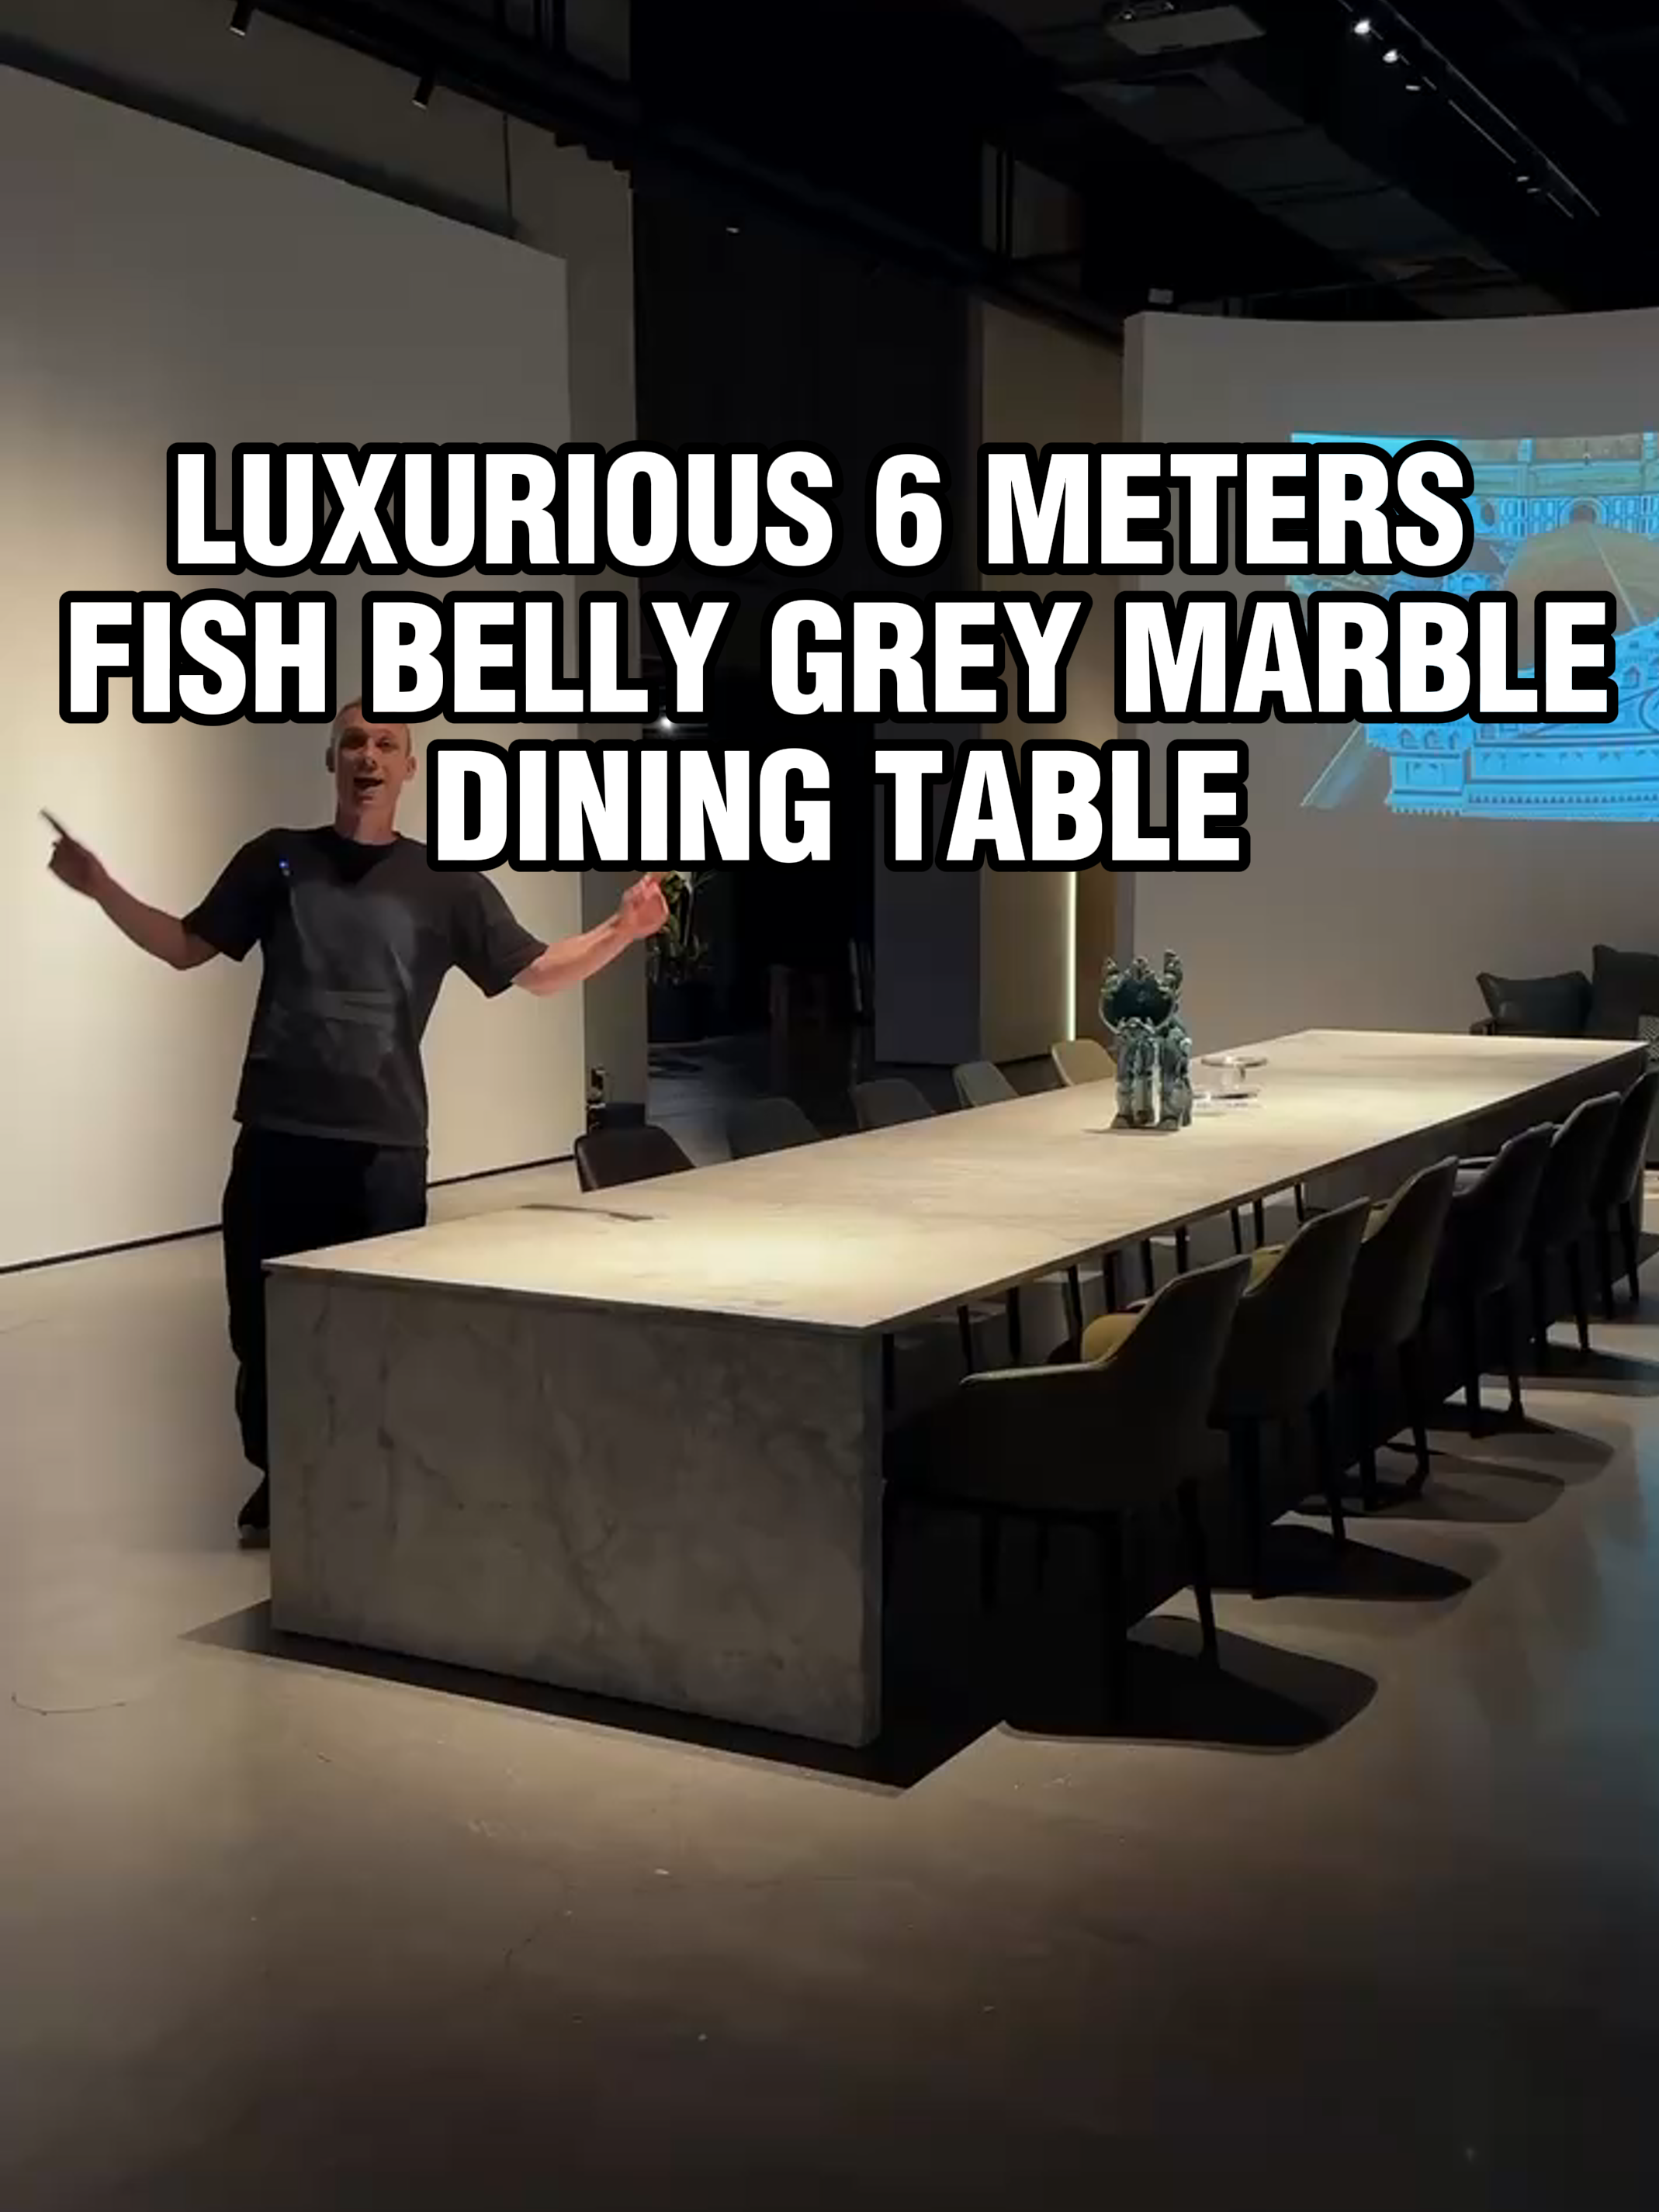 6 meter long Fish Belly Grey Marble Dining table. A luxurious dining table which can be used as meeting table with build in wire less charging function for mobile phone.#cityhousefurniture #furniture #chinafurniture #chinasourcing